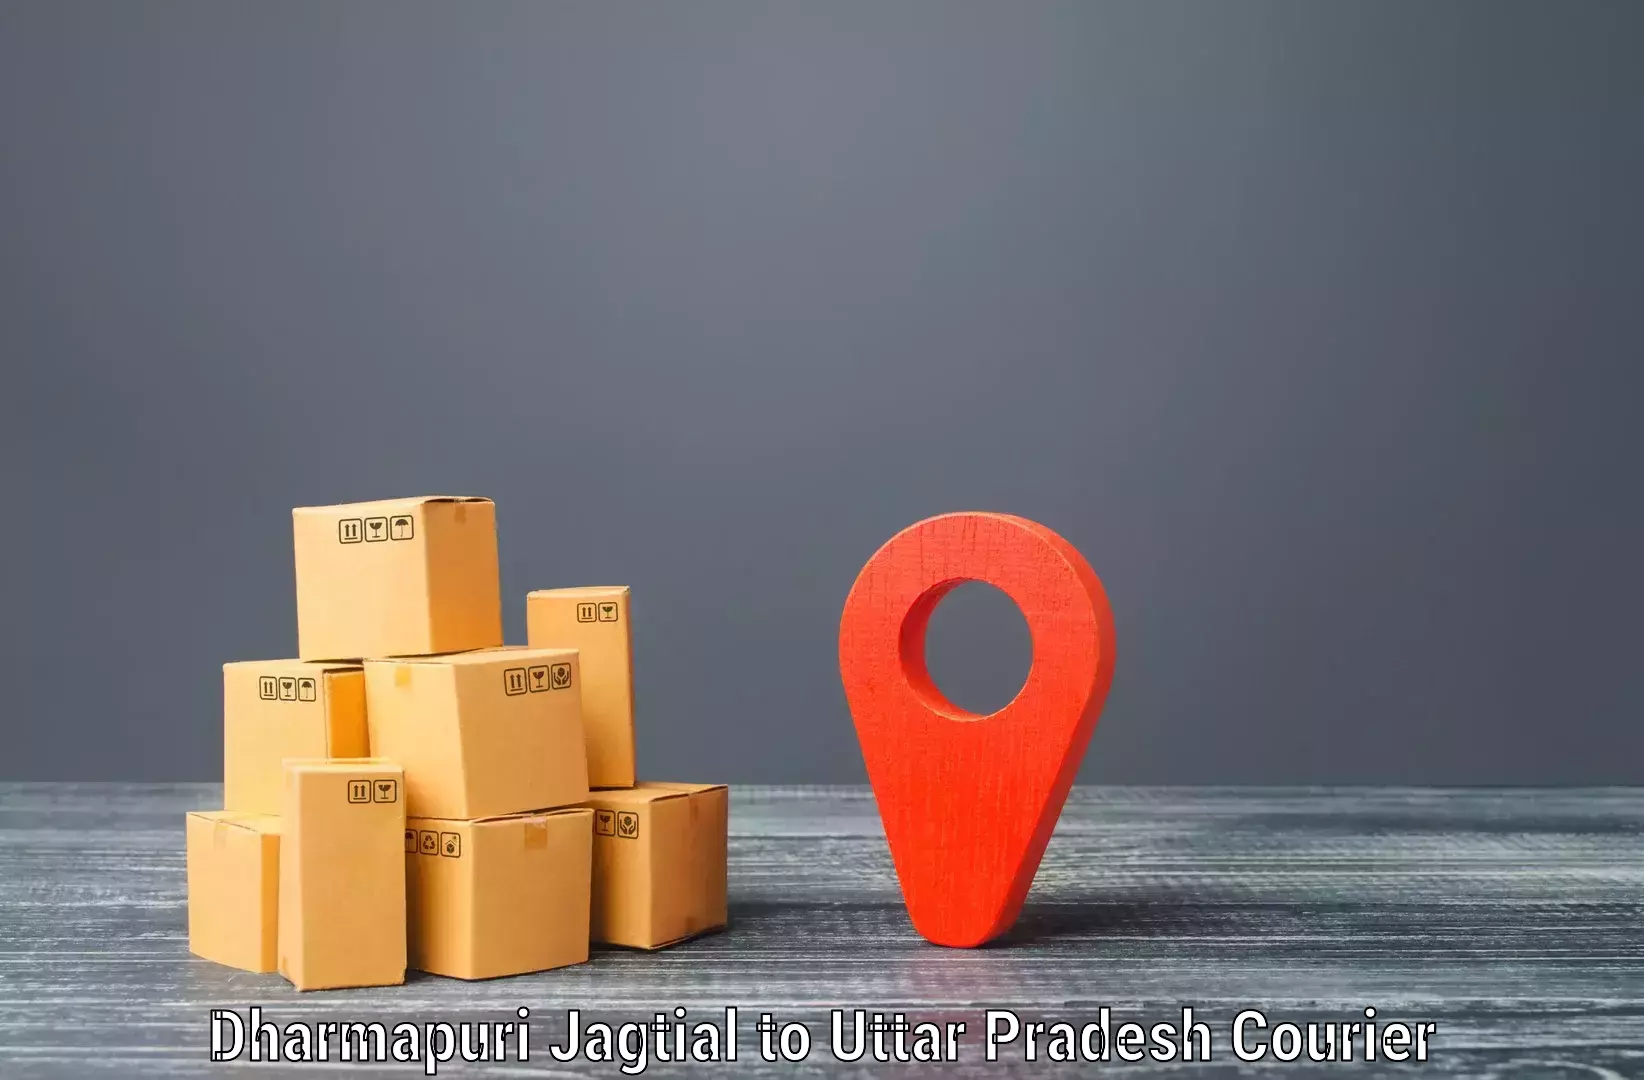 Round-the-clock parcel delivery in Dharmapuri Jagtial to Konch